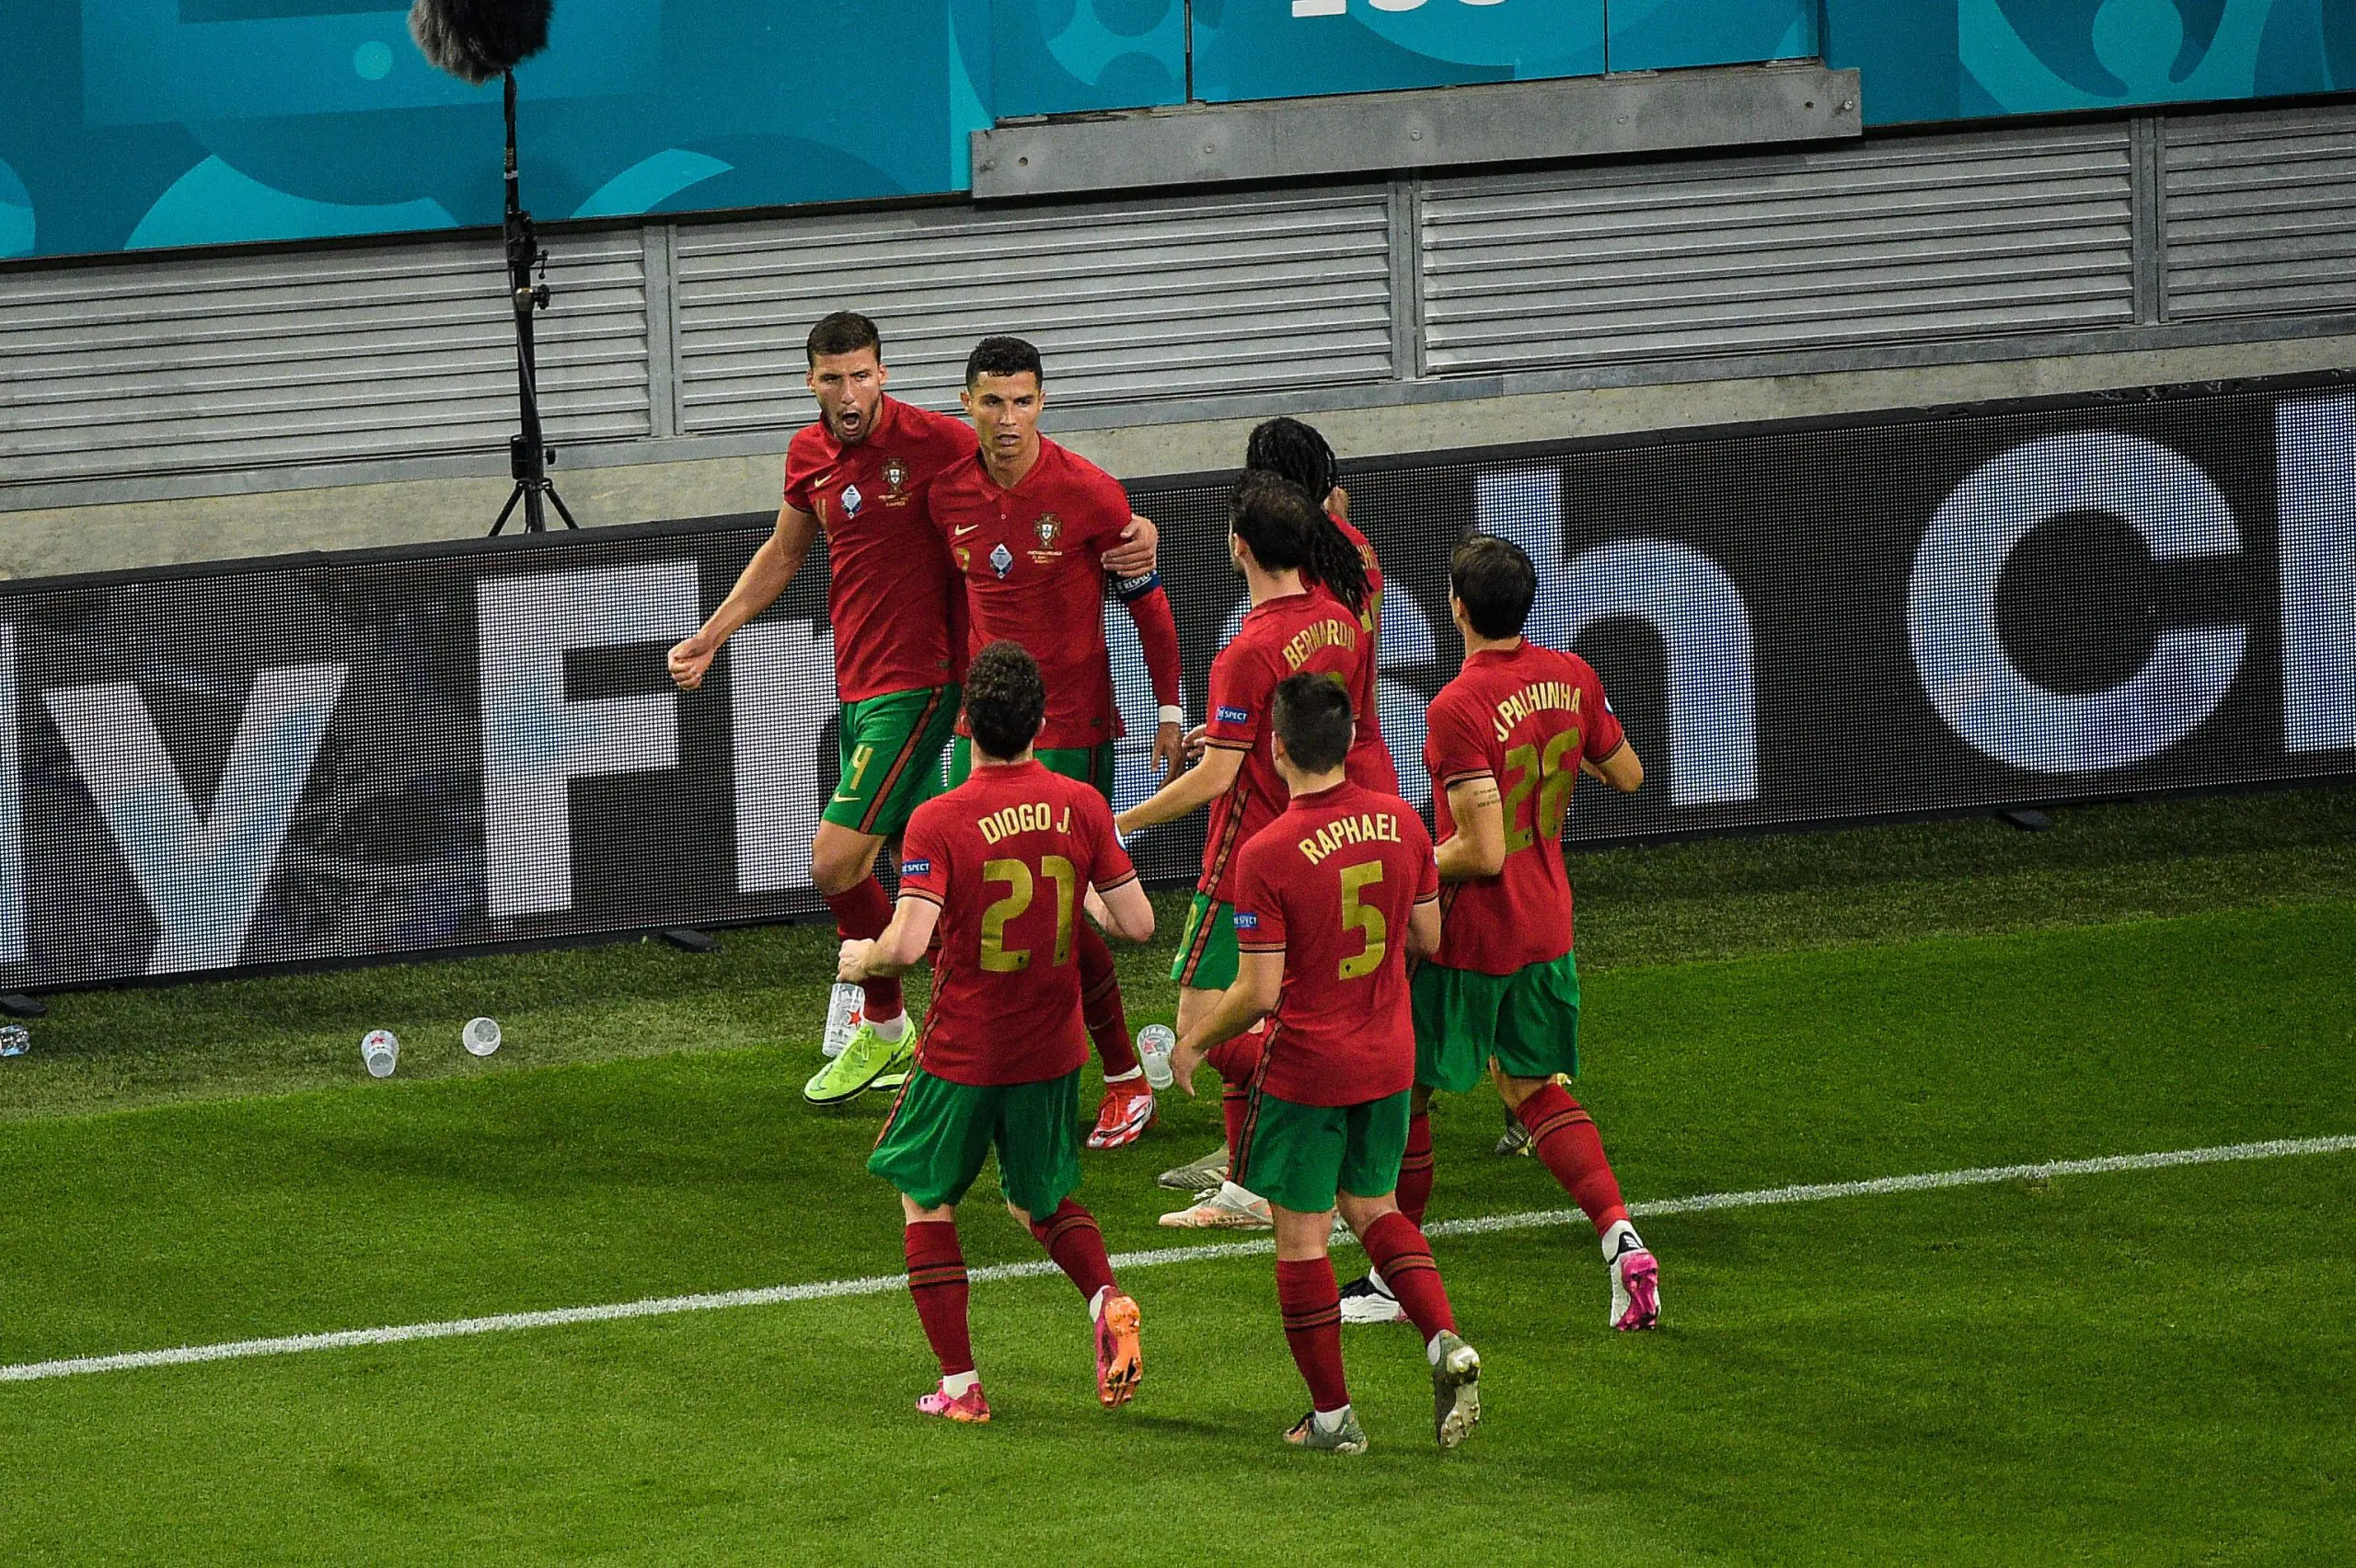 Portugal National Team Are 6th In FIFA Rankings